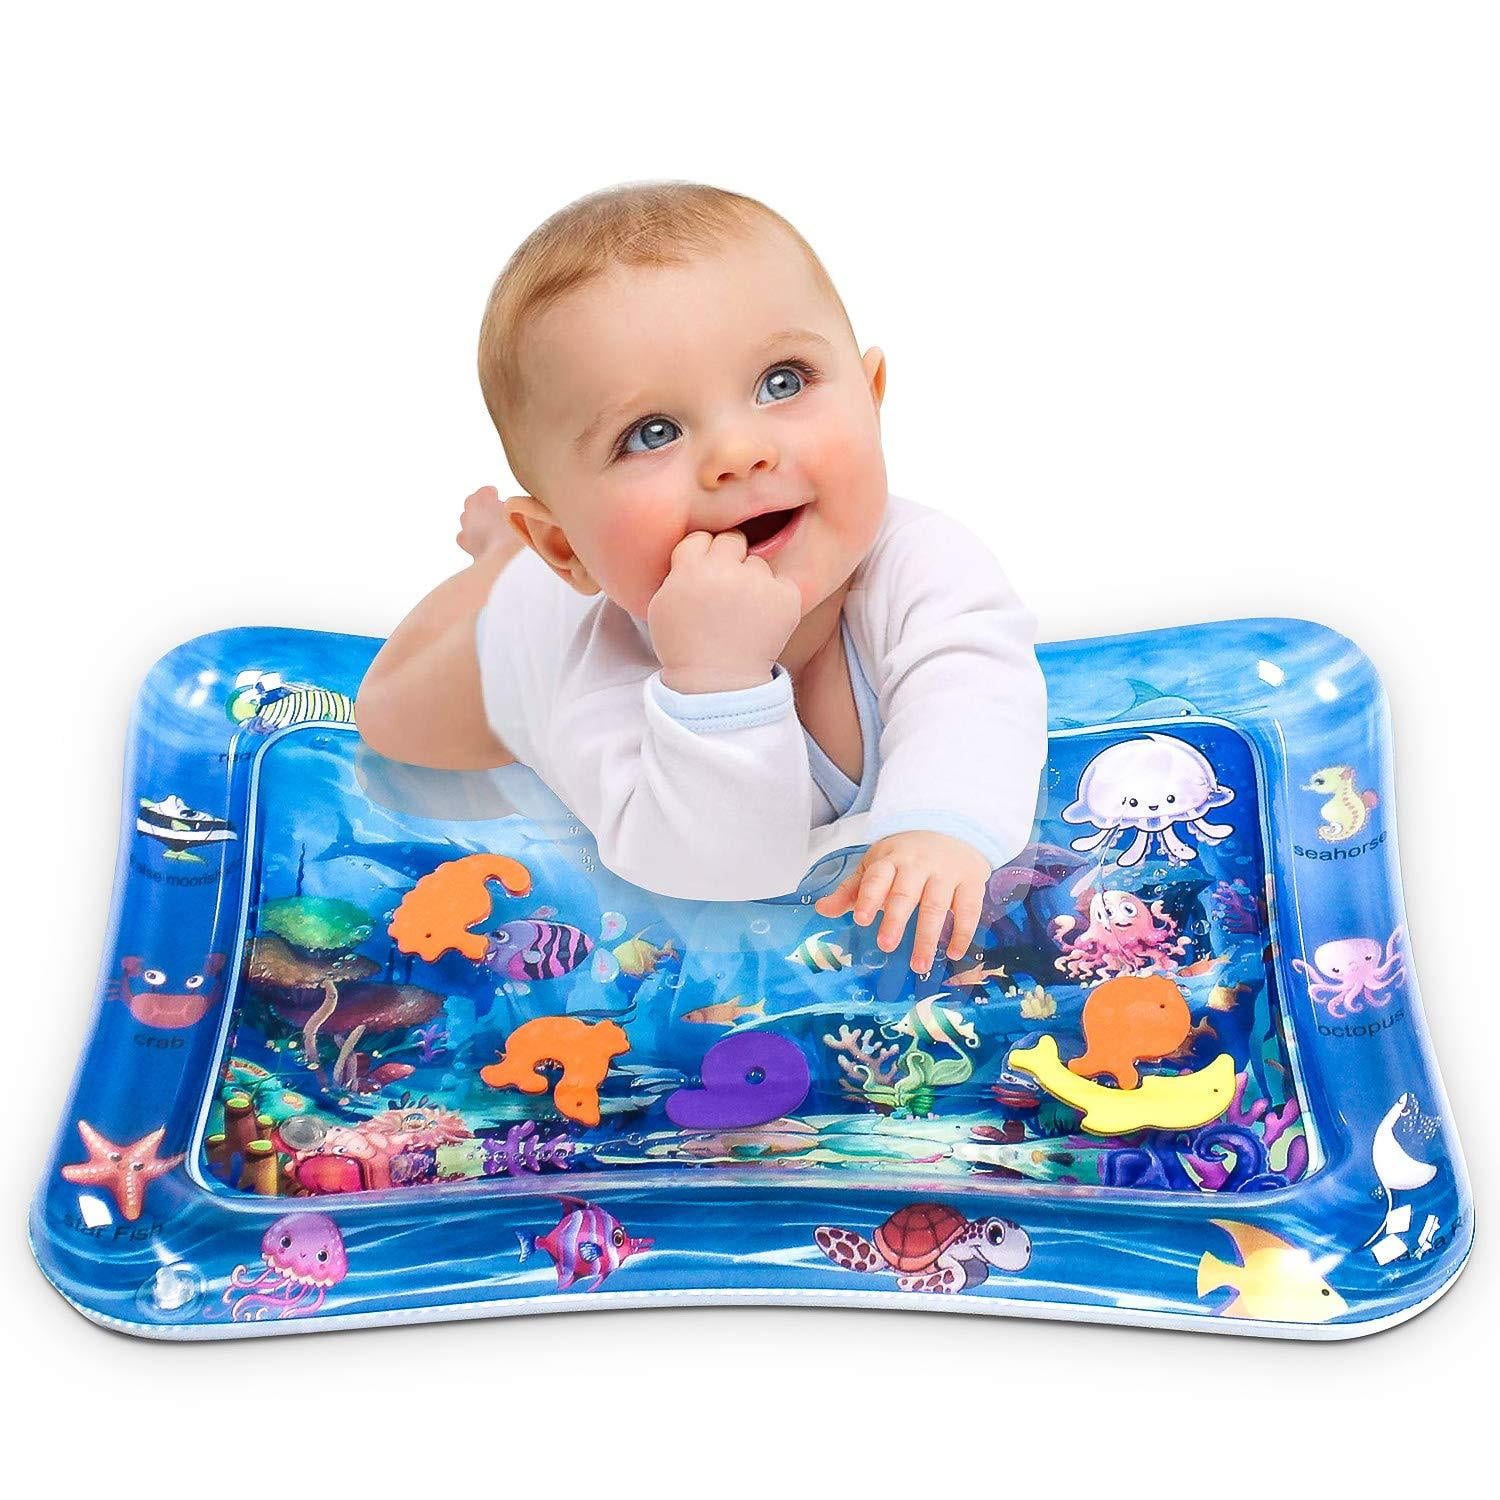 Inflatable Tummy time Mat Premium Water Play mat Baby & Toddlers is The Perfect Fun time Play Inflatable Water mat Toys Activity Center Your Baby's Growth Stimulation 